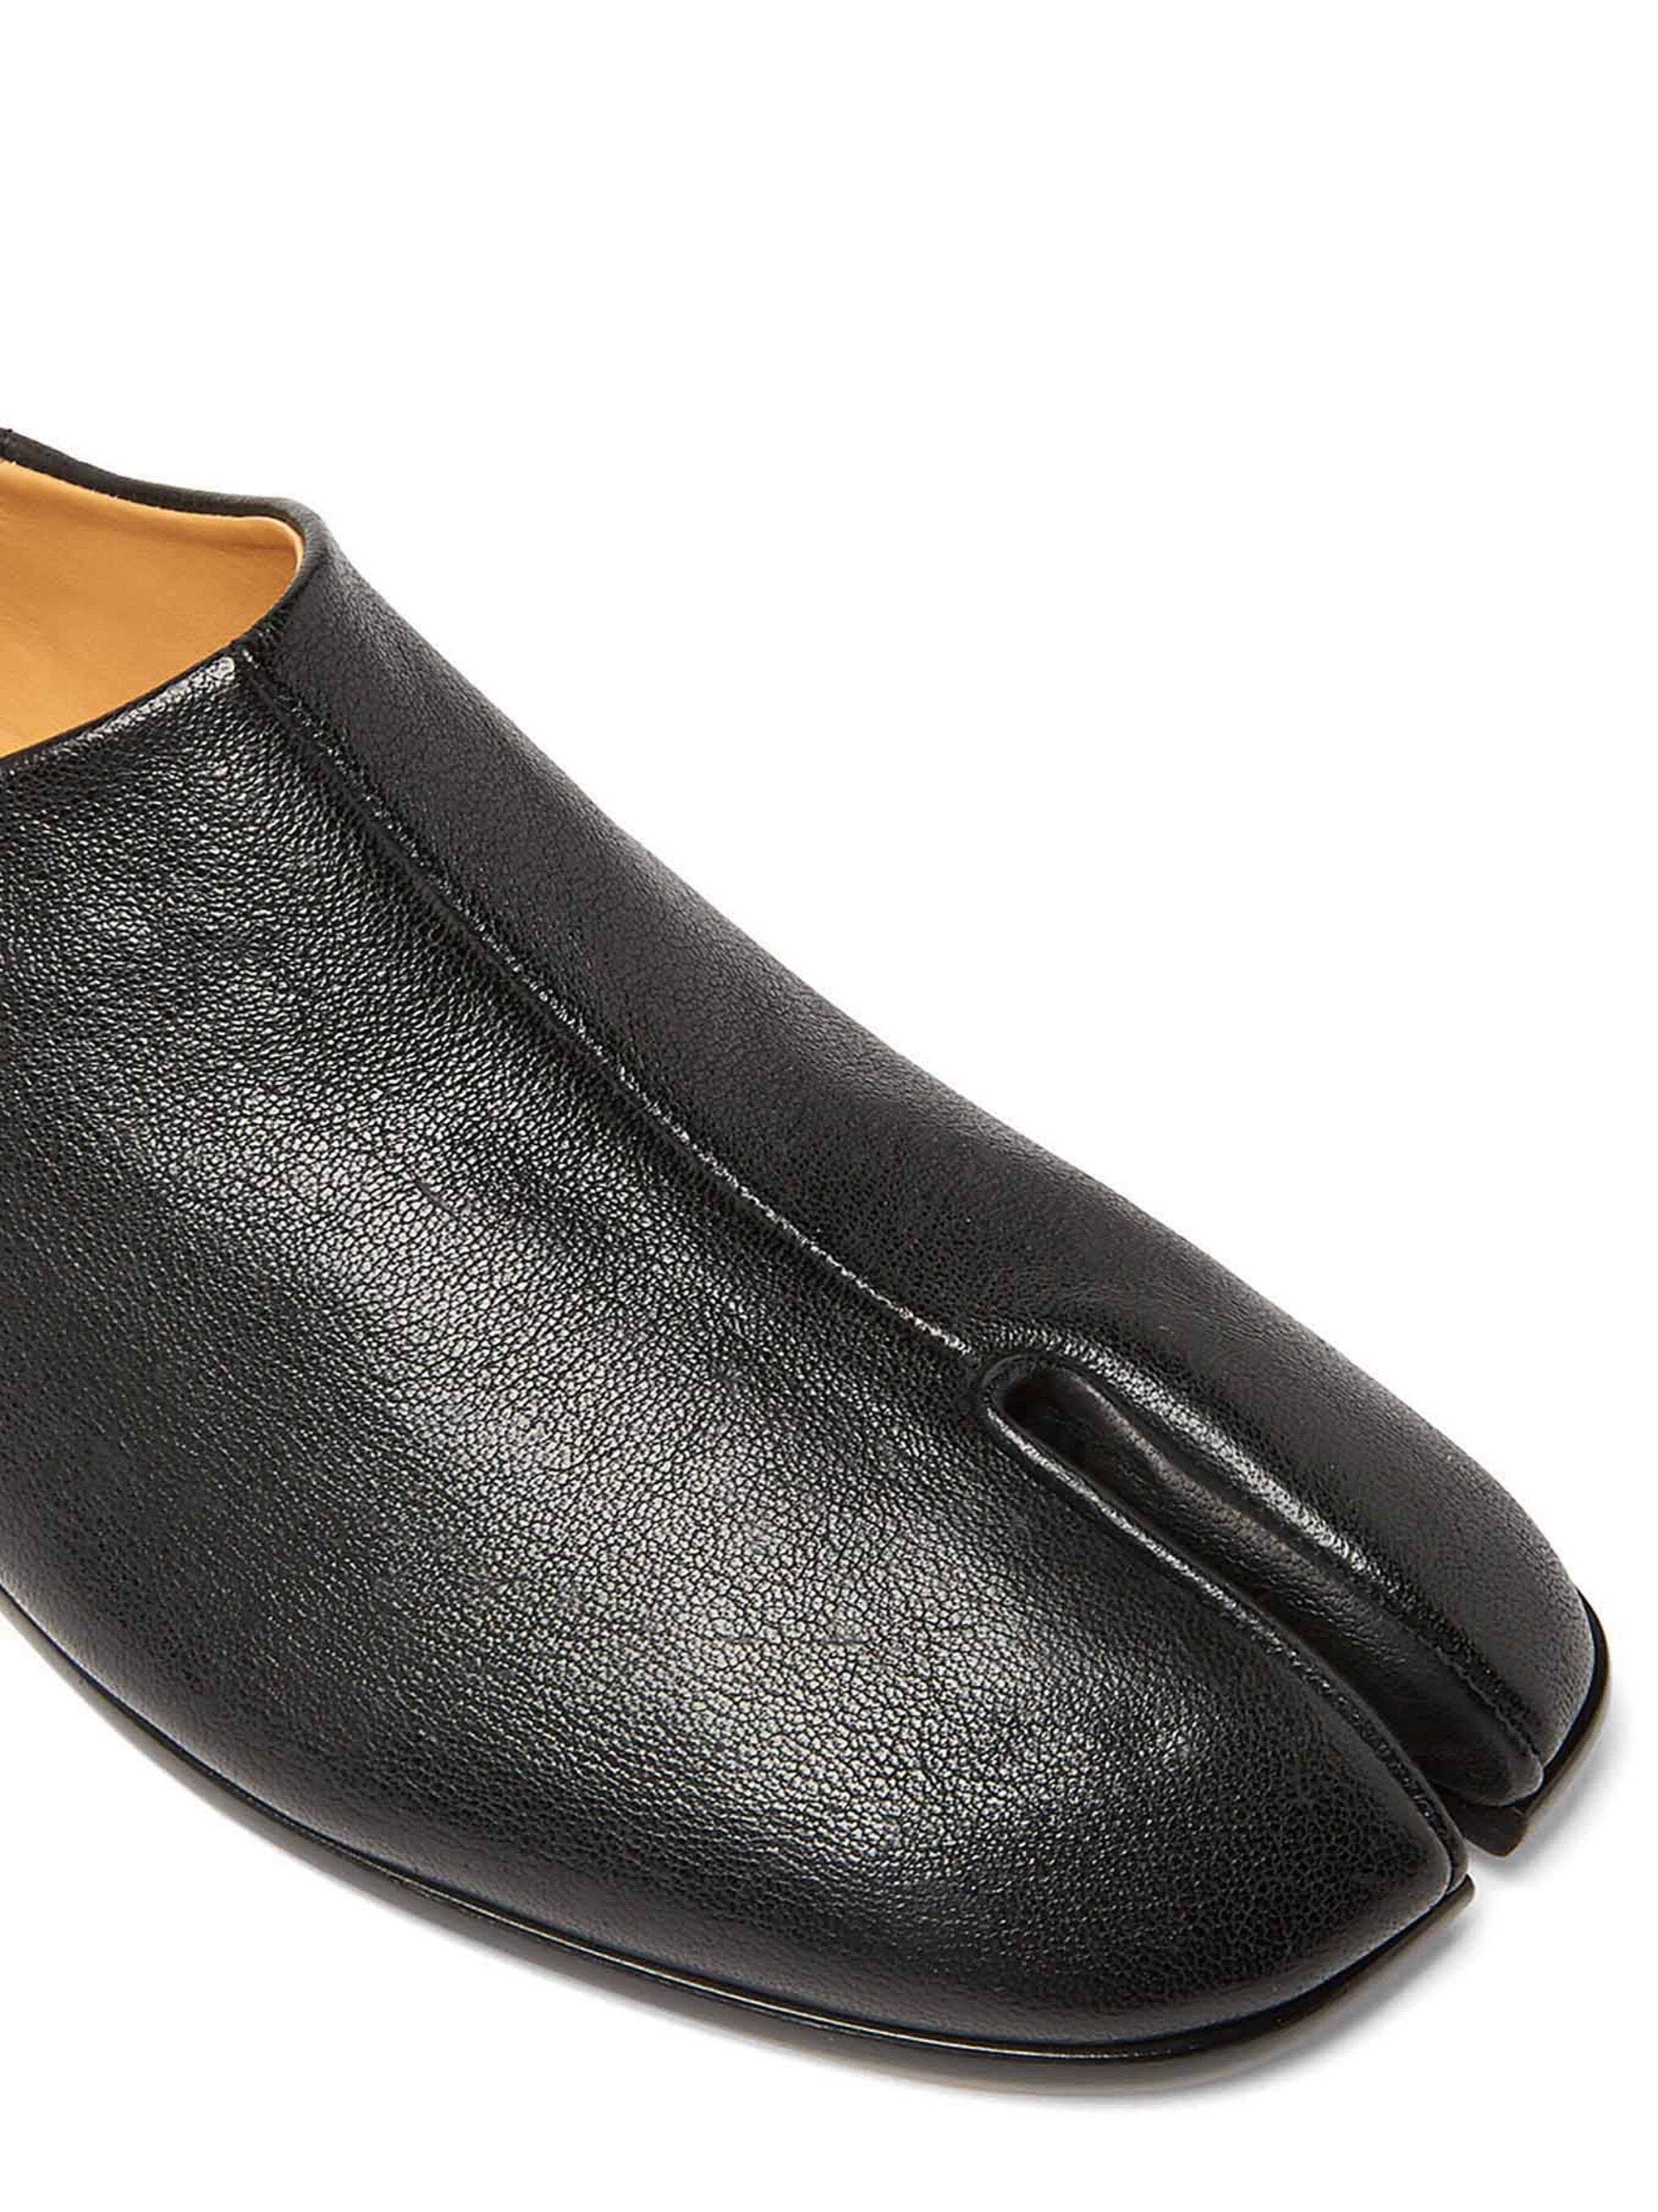 Tabi Leather Shoes